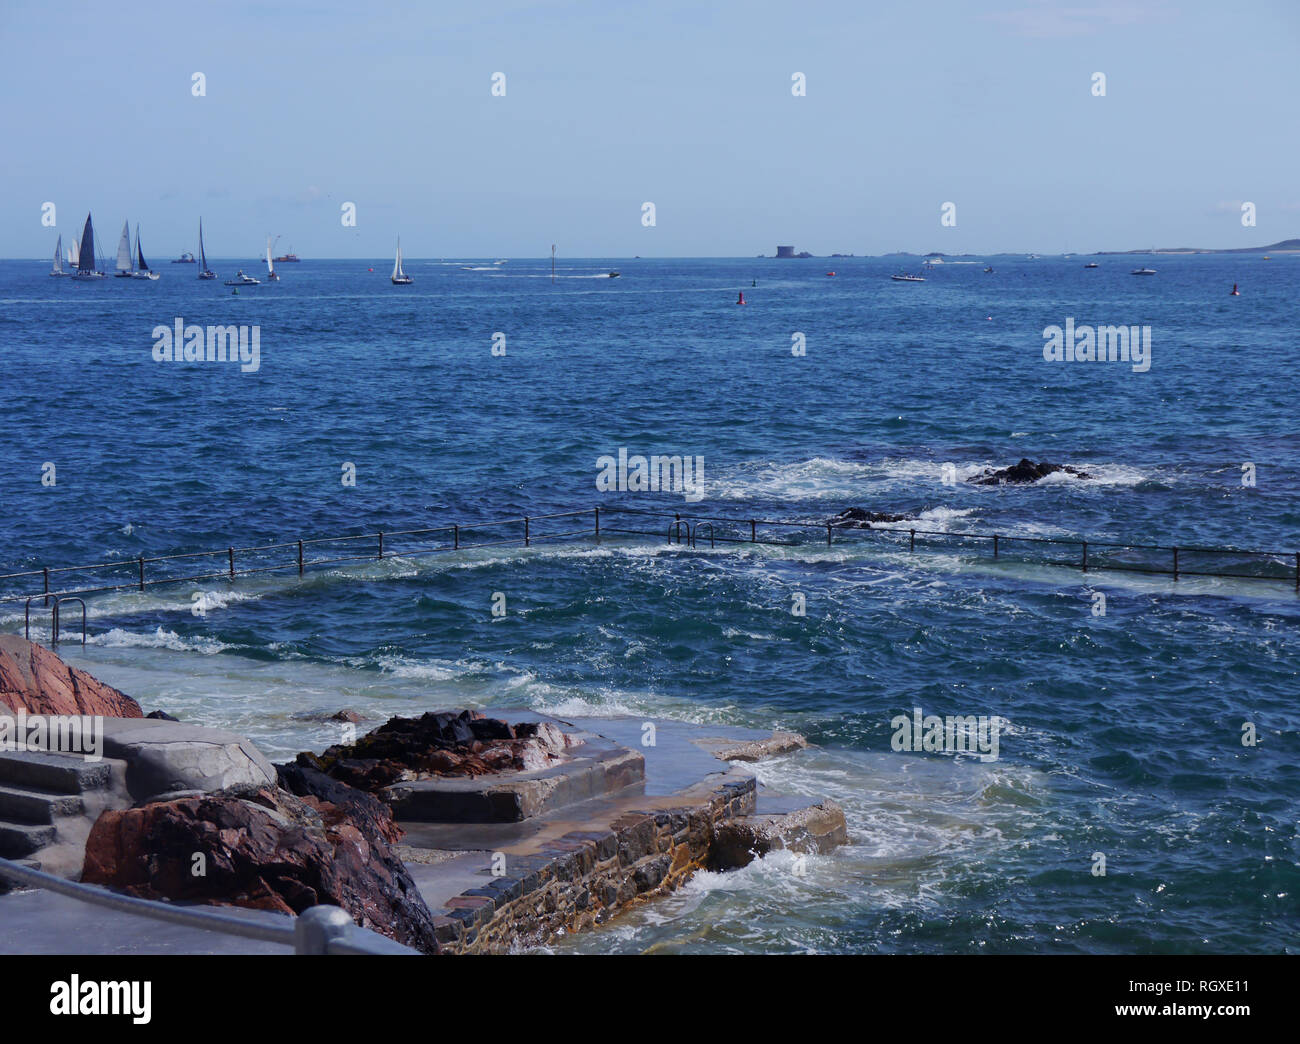 The Outdoor Swimming Pool in Havelet Bay, St Peter Port, Guernsey, Channel Islands.UK. Stock Photo